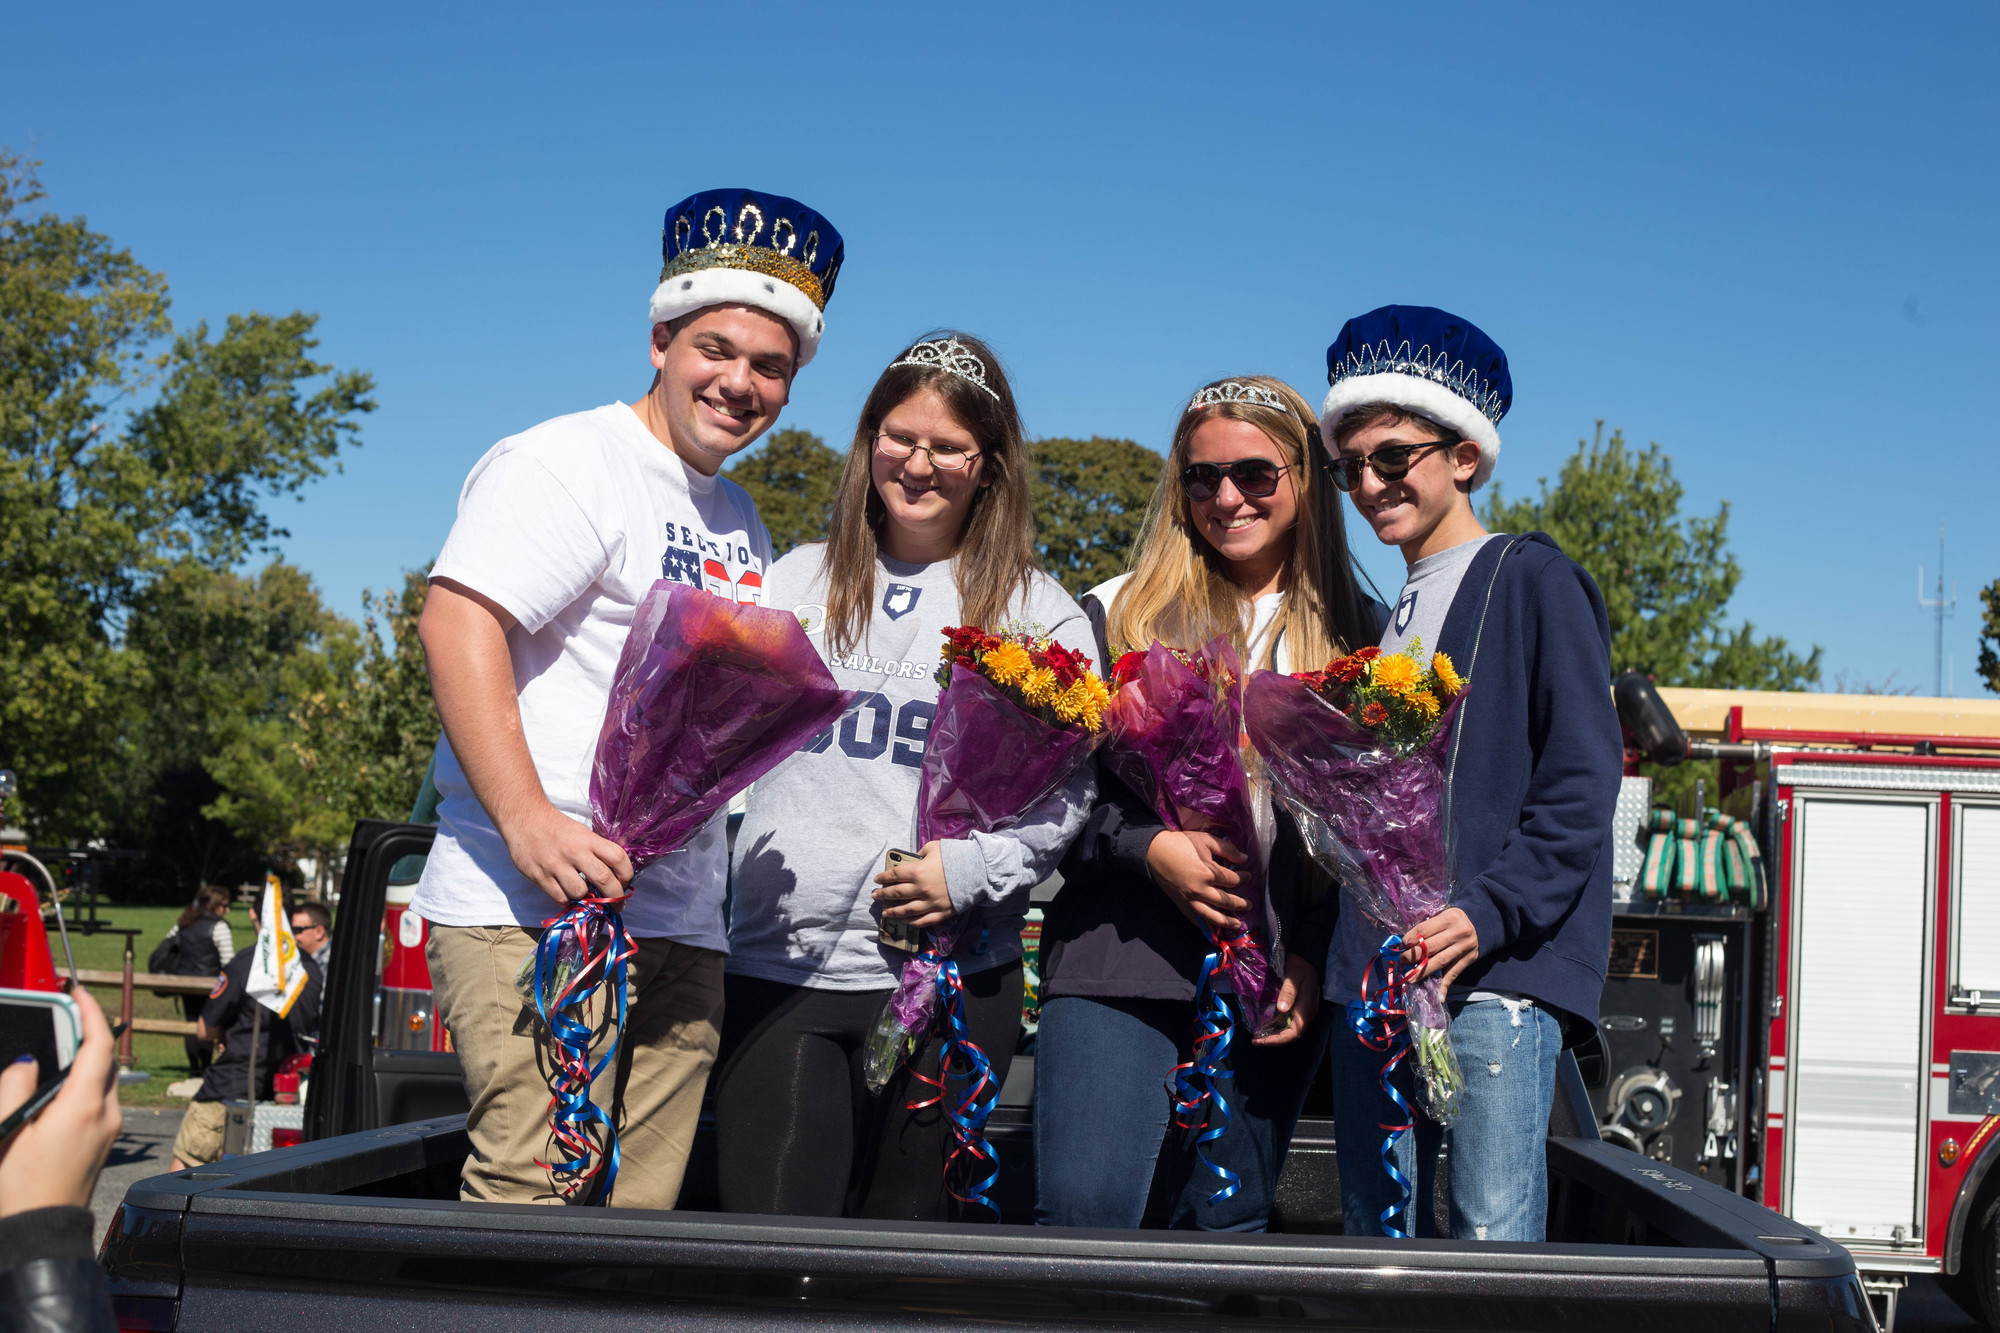 The Homecoming Court looked over their subjects. From left, King Ben Cyrulnik, Queen Samantha Colten, Princess Grace Bandini, and Prince Ben Murasso.